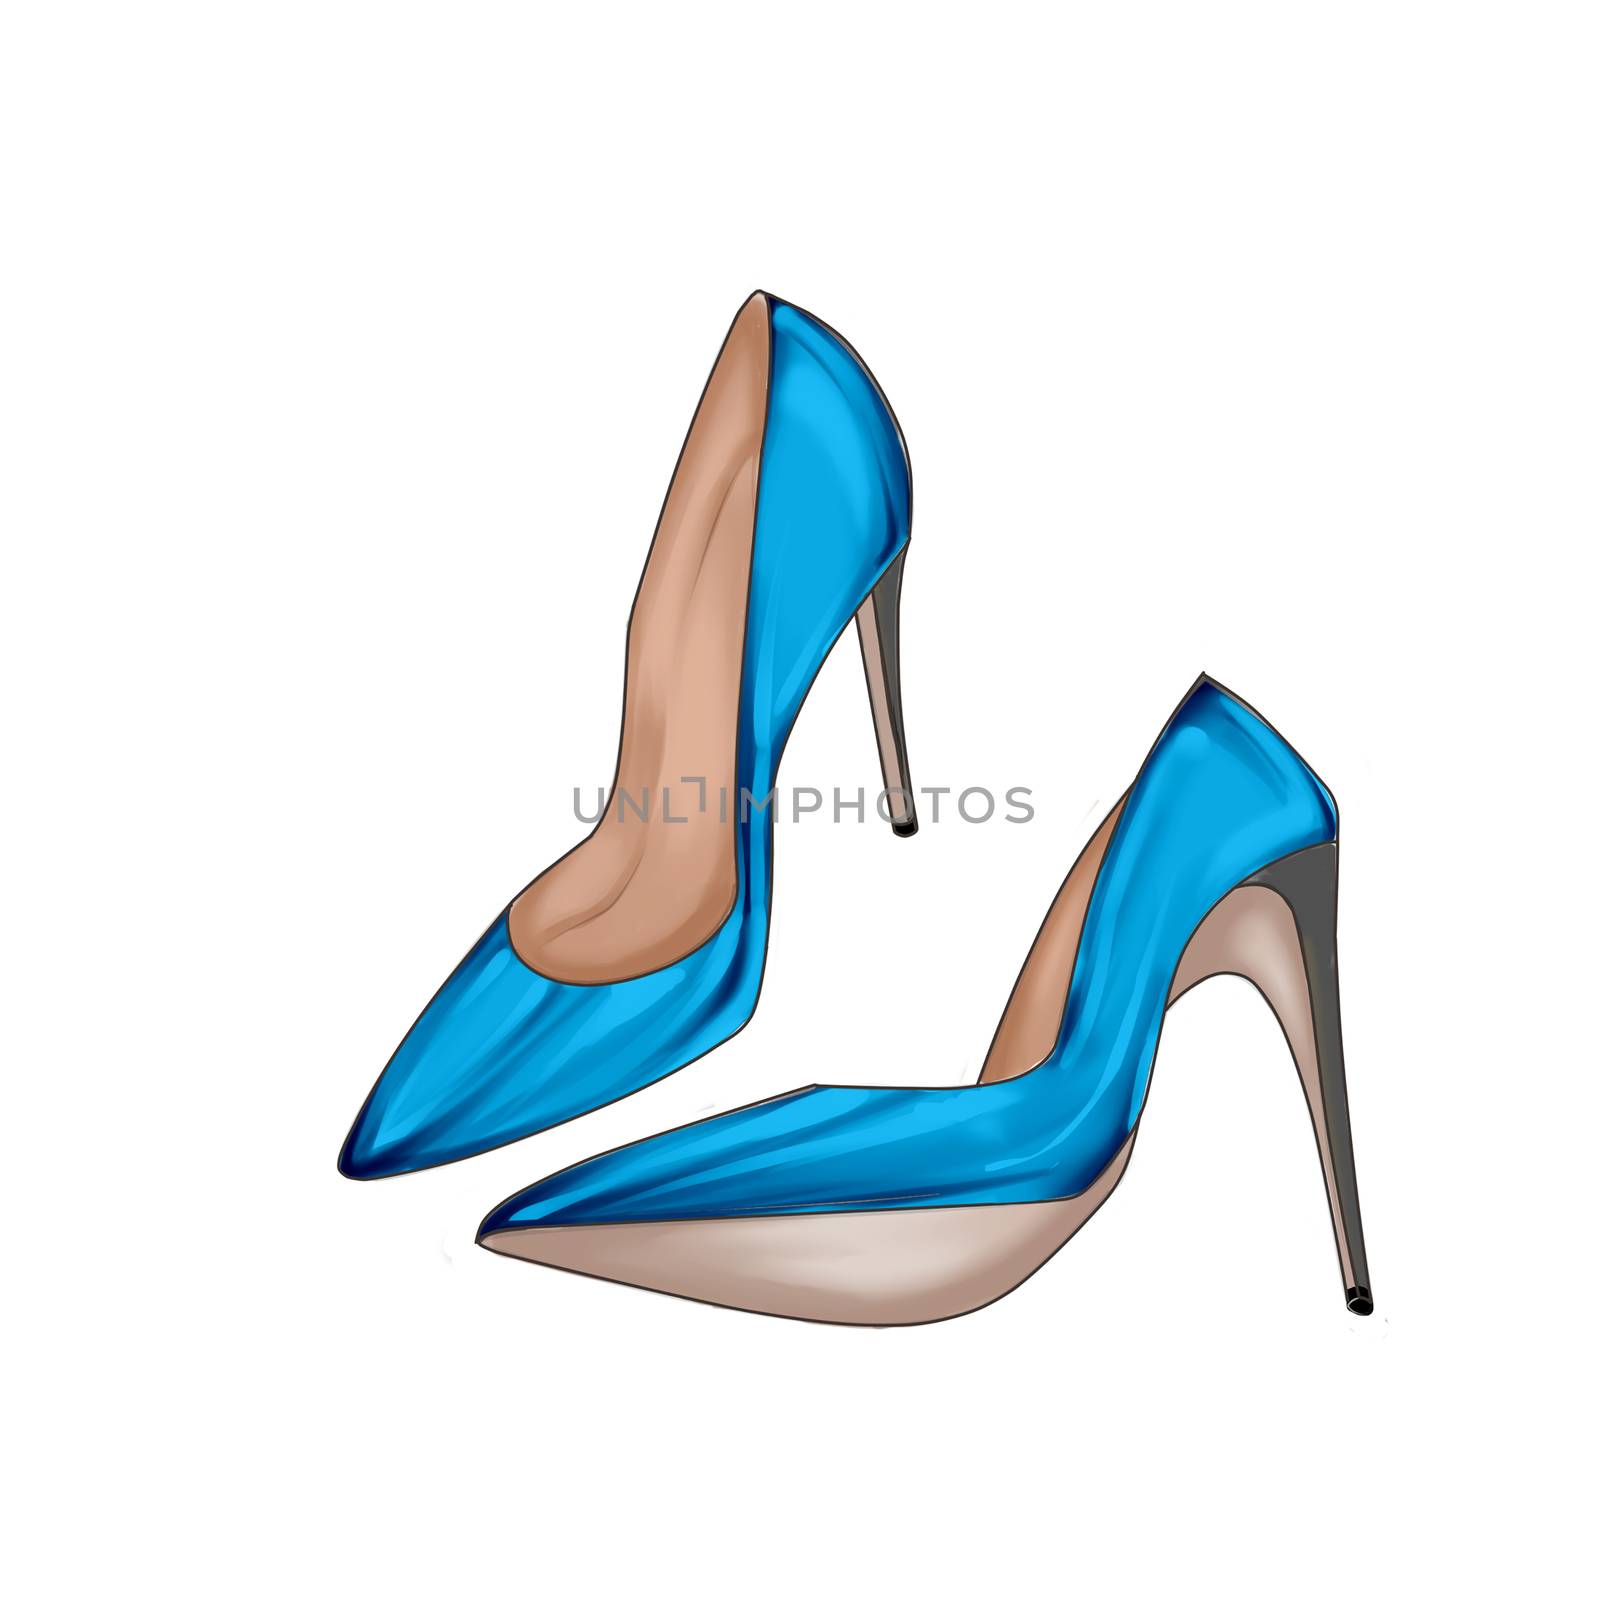 Hand drawn Illustration of a pair of Blue stiletto shoes